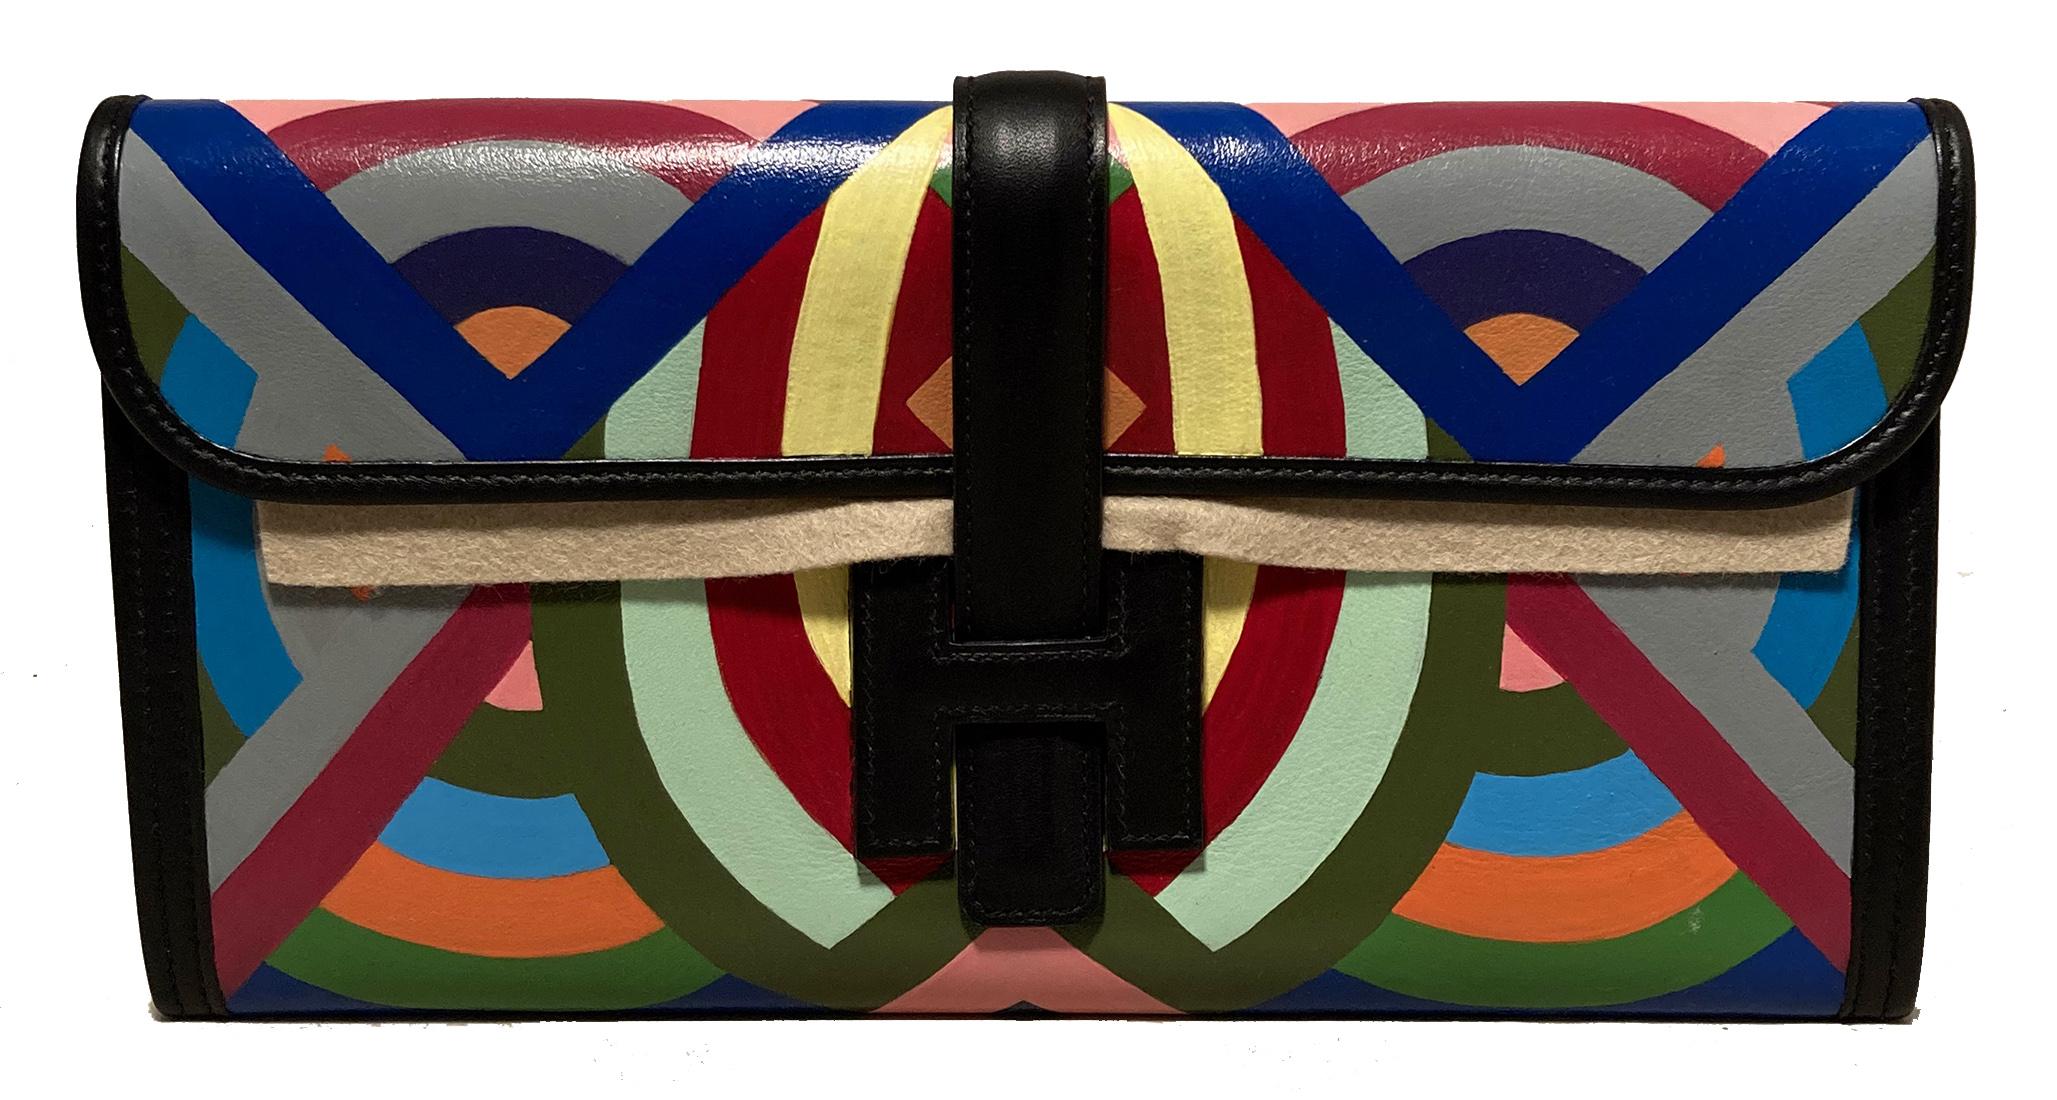 Hermes Black Painted Jige 28 Clutch in excellent condition. Black swift leather with colorful geometric hand painted design featuring grey, blues, greens, reds, pink, yellow and orange surrounding exterior. Front H leather strap closure opens to a